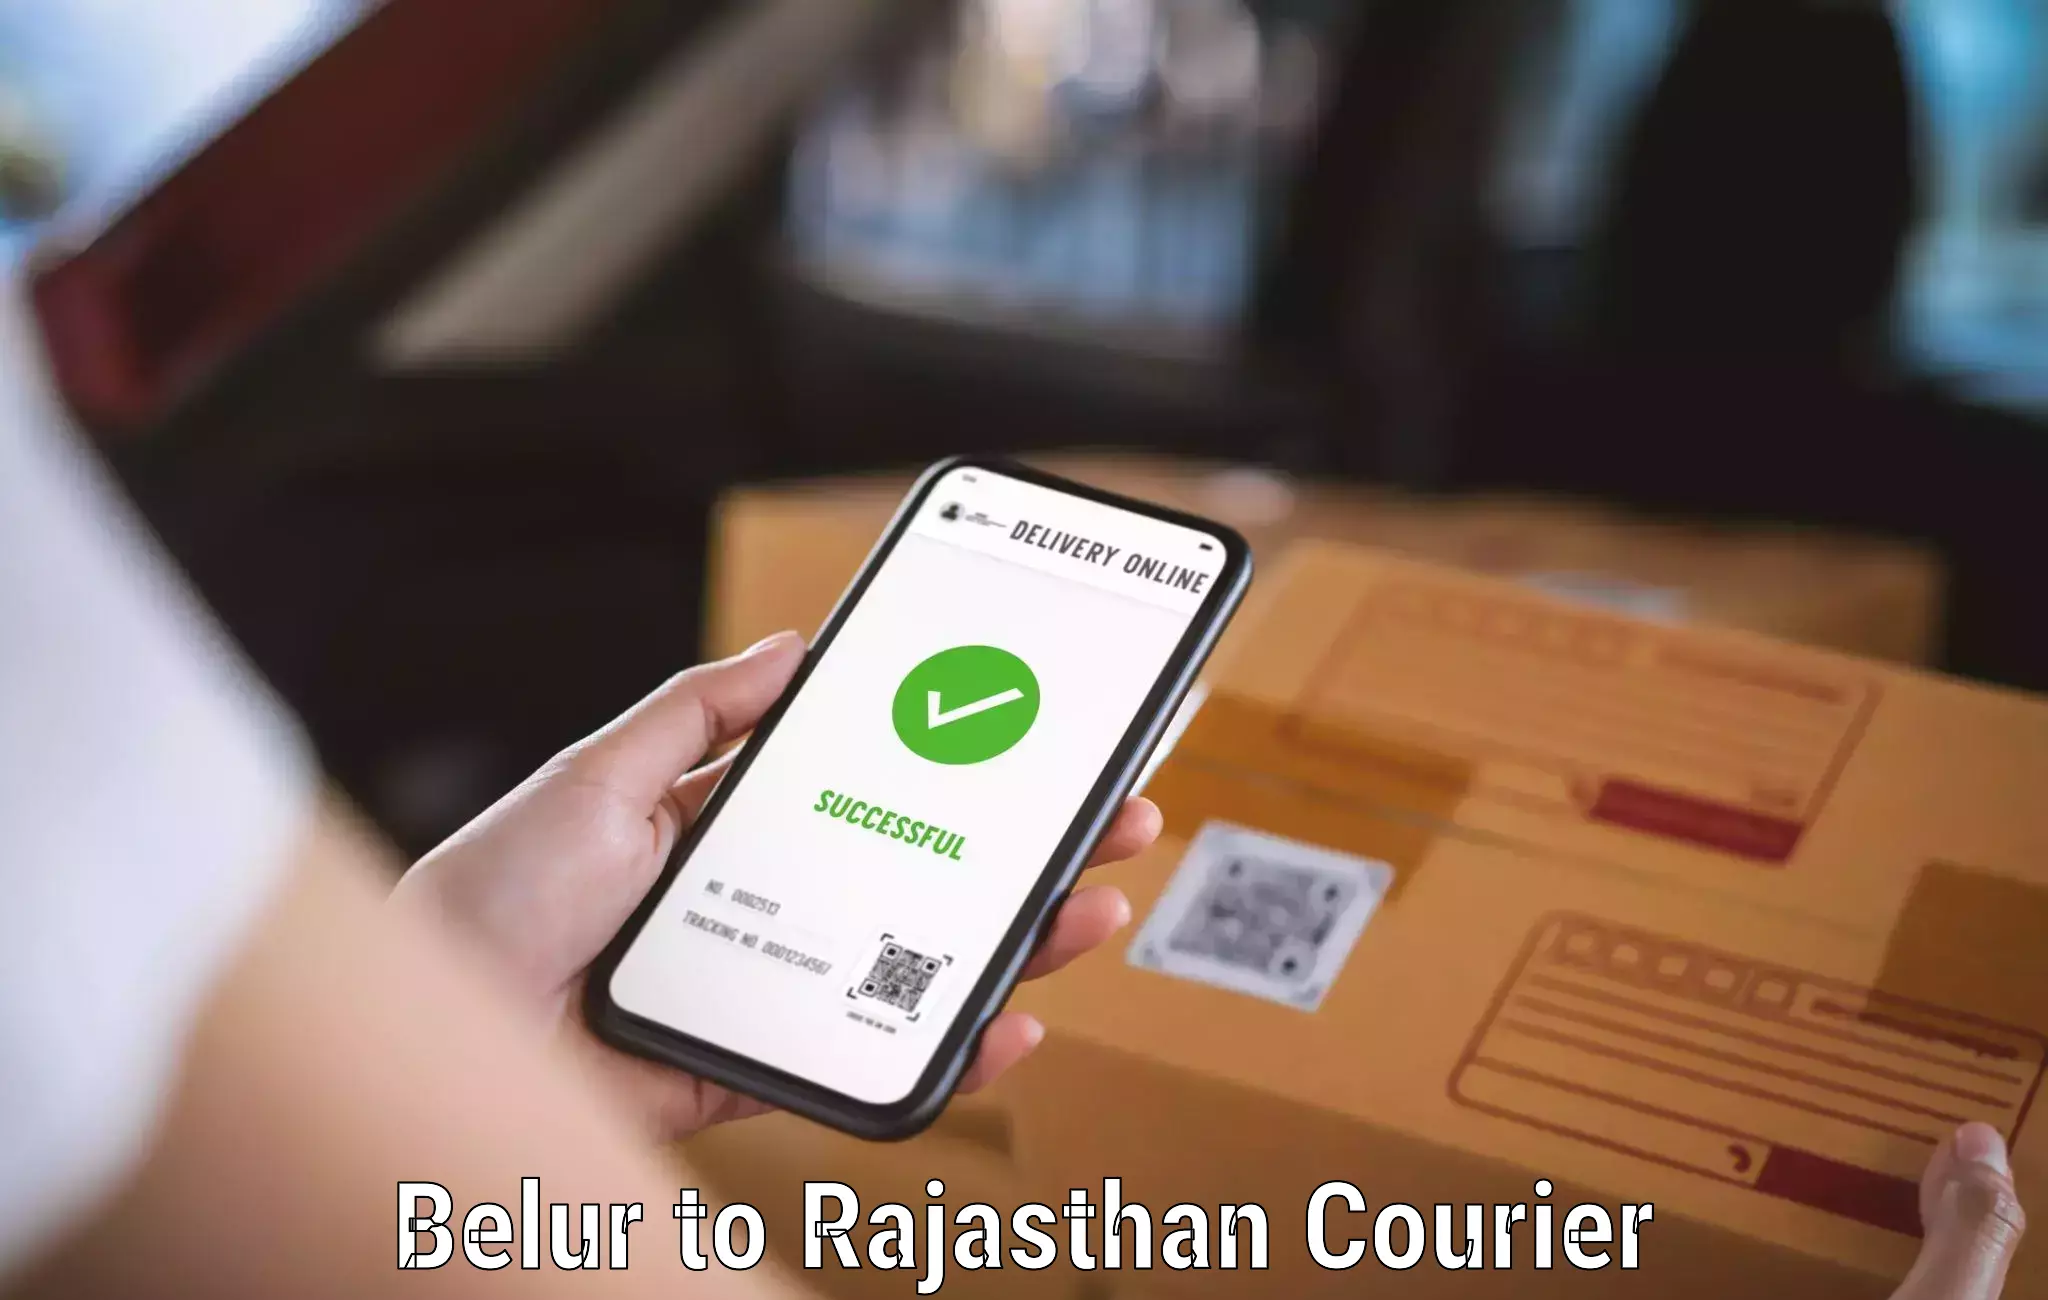 State-of-the-art courier technology Belur to Behror